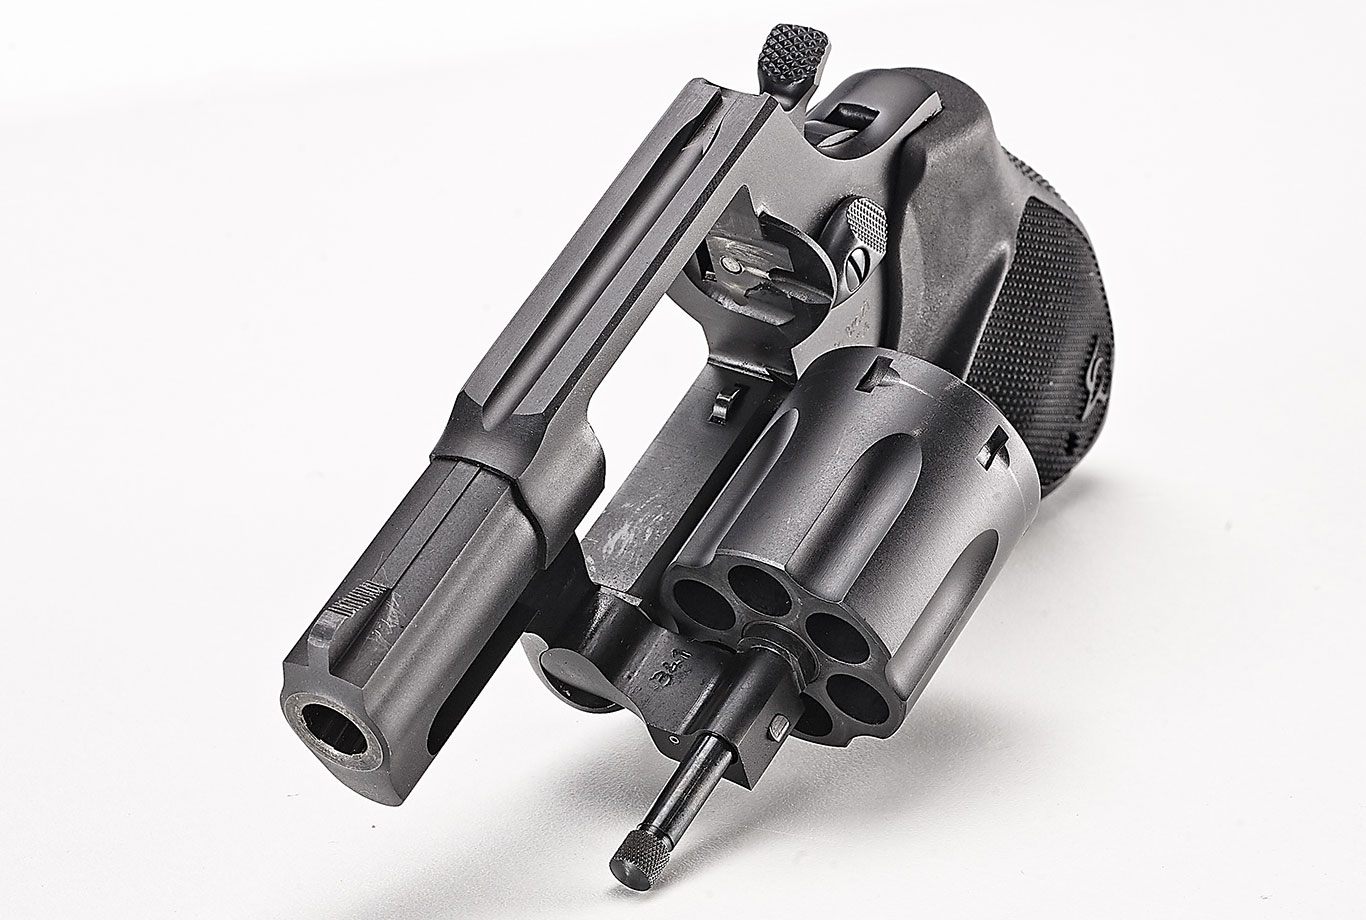 Taurus 856 38 Special Revolver Review